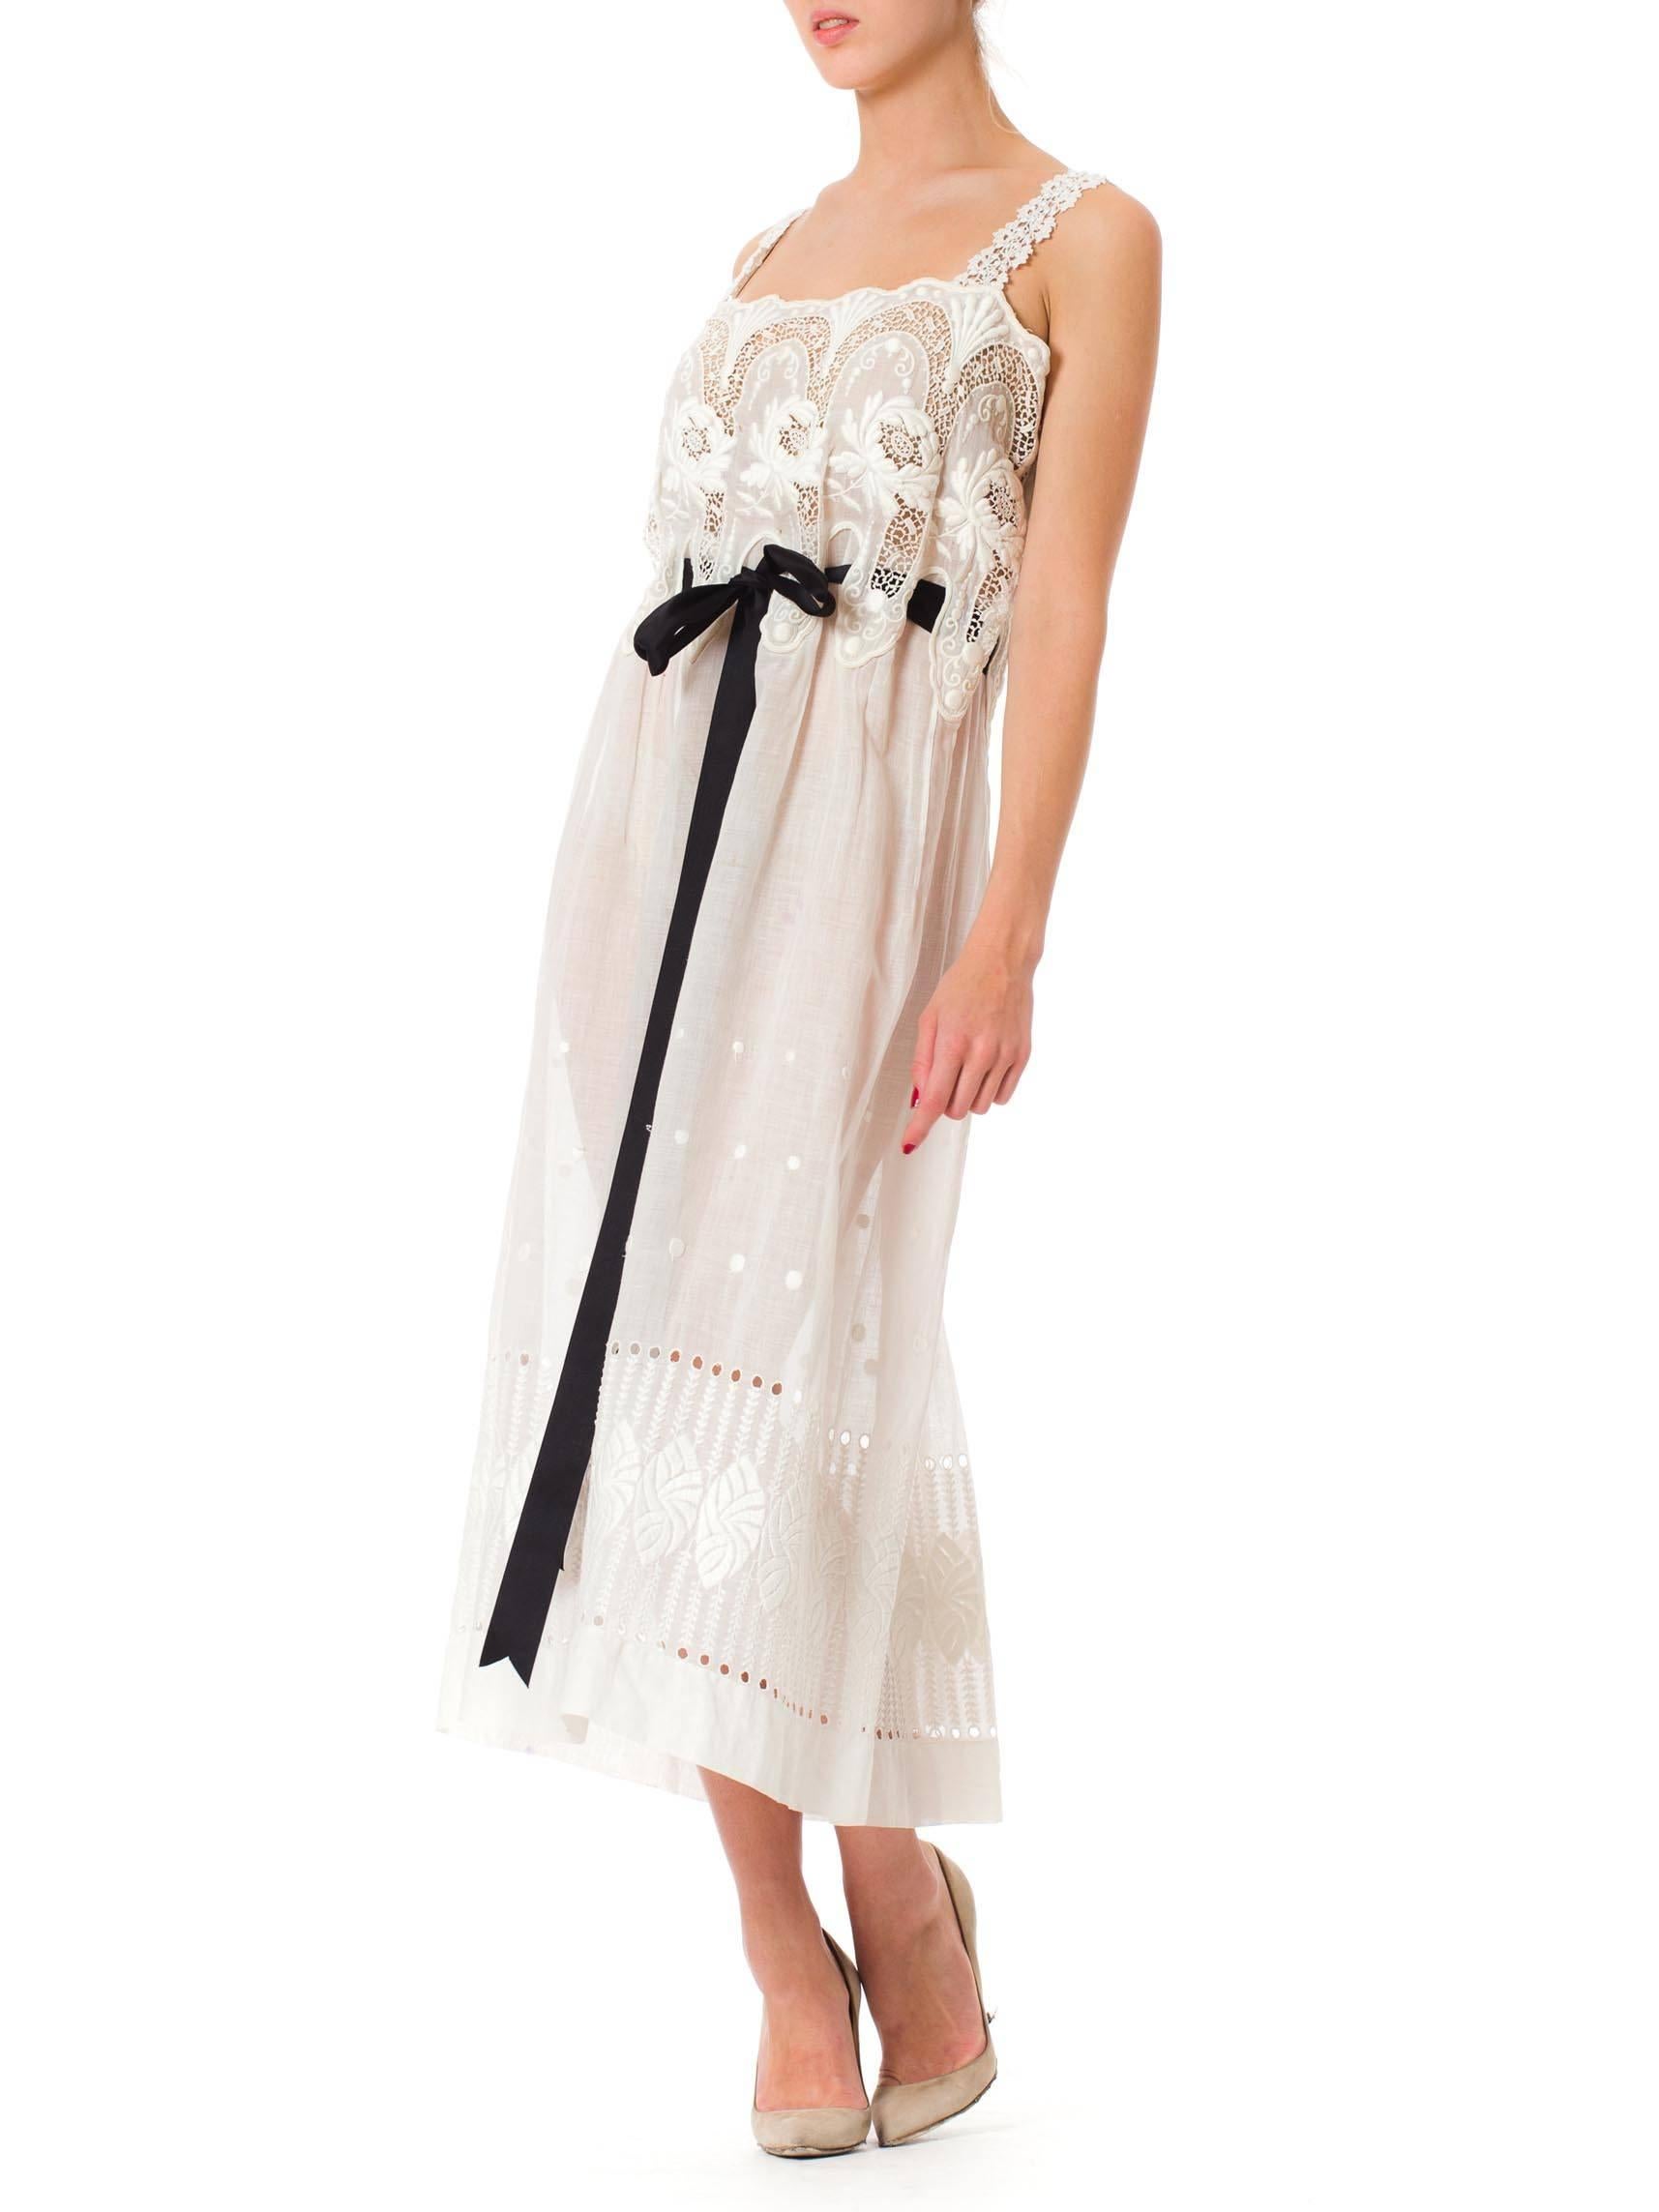 MORPHEW COLLECTION White Victorian Cotton Voile Dress With Lace Details & Black 3